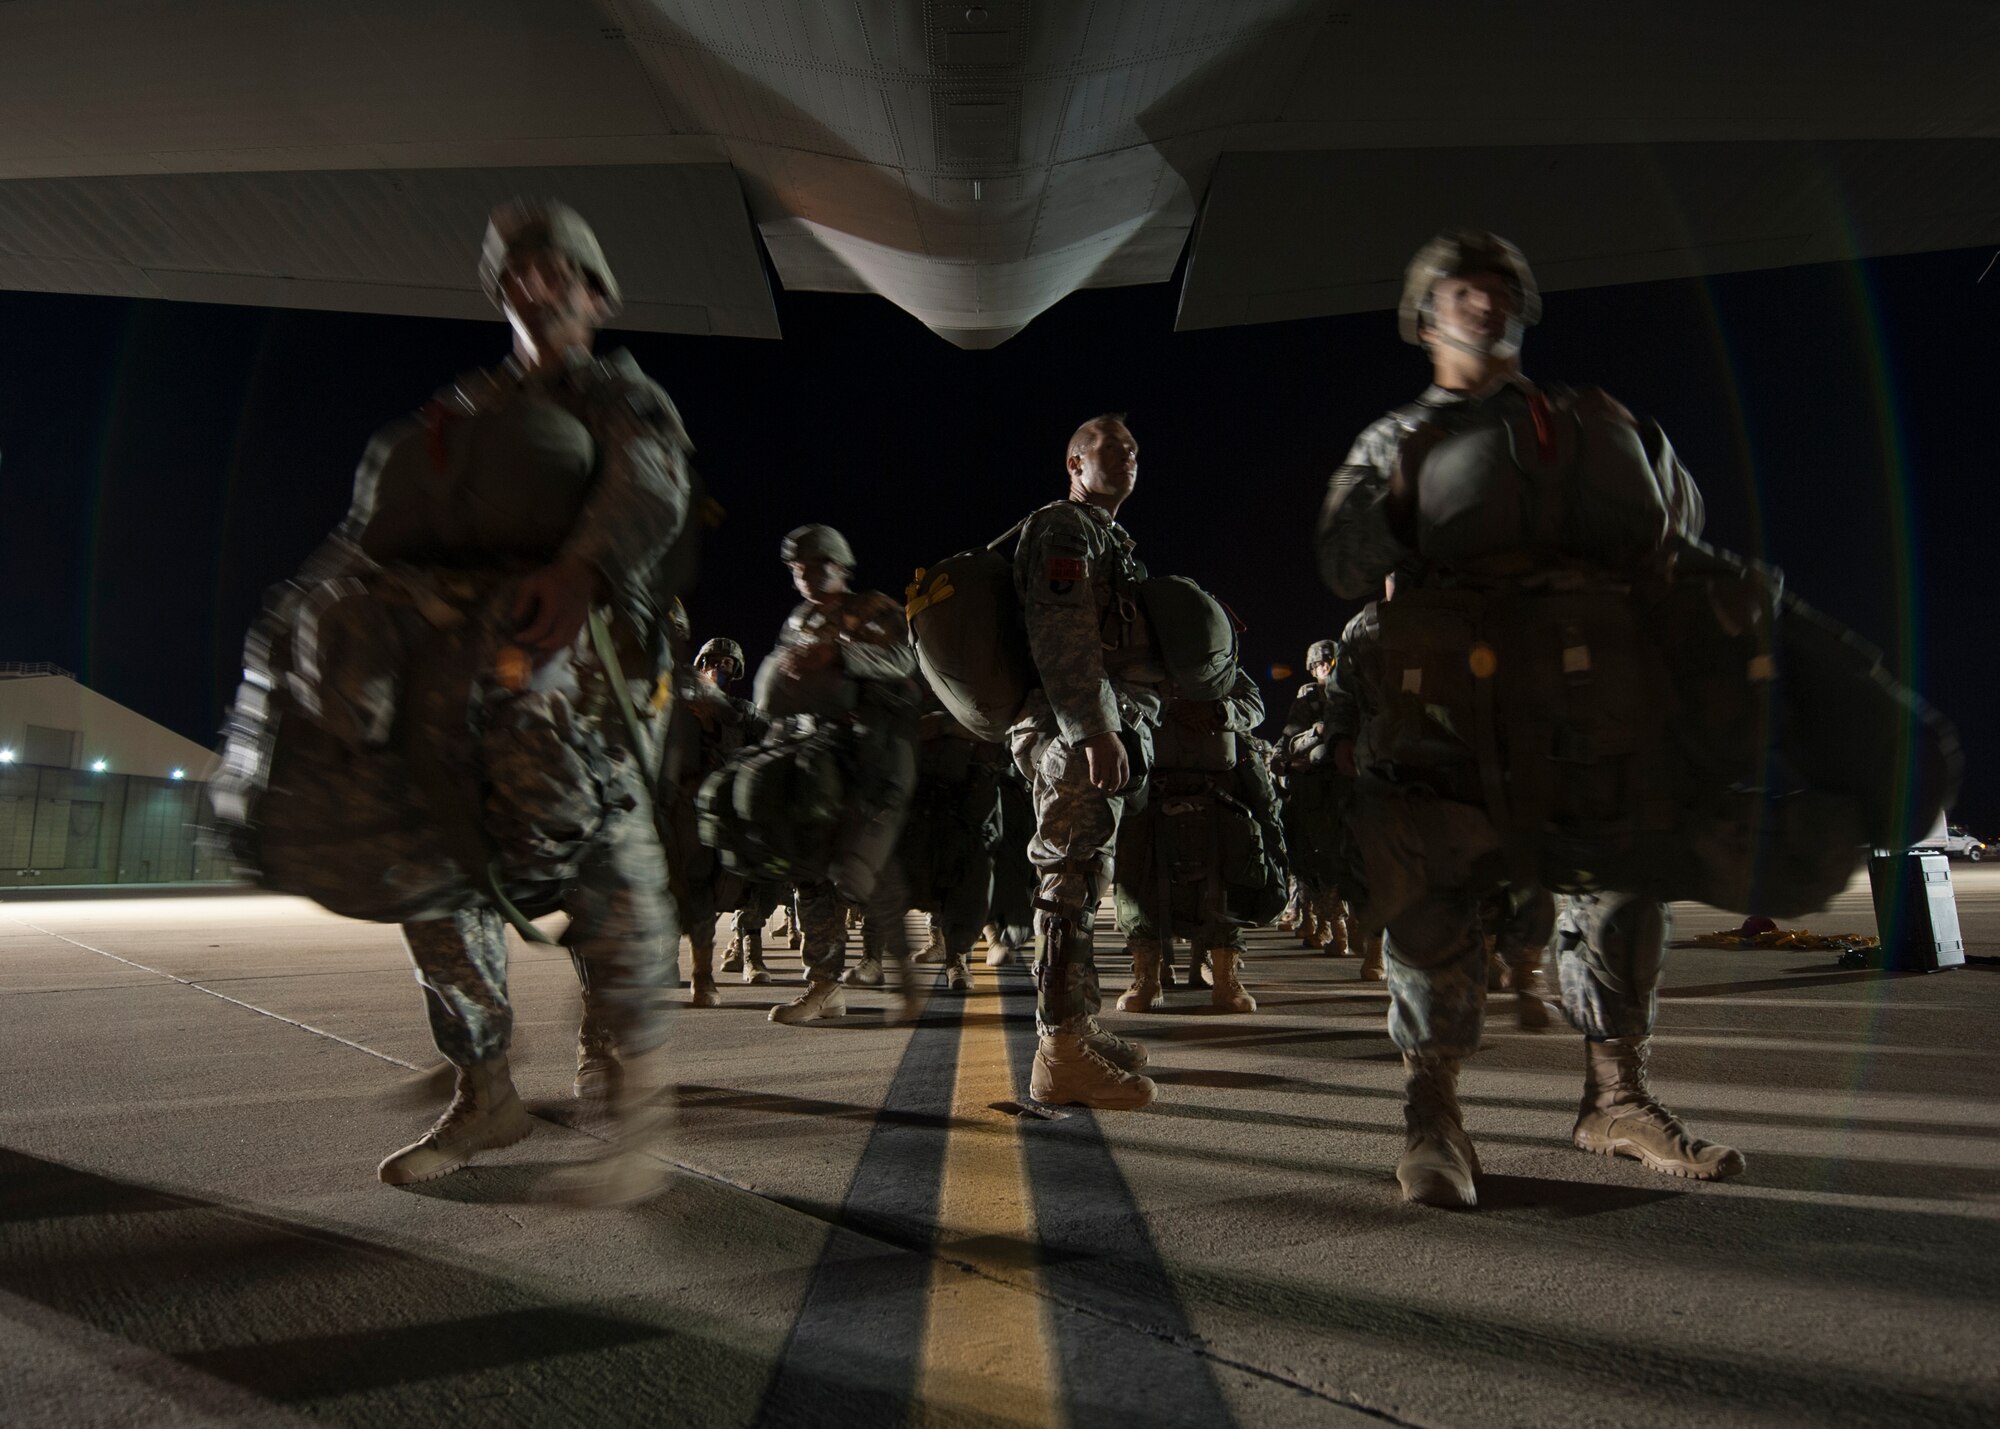 Troops from the Army’s 2nd Brigade Combat Team, 82nd Airborne Division board a C-130J Aug. 6, 2015, at March Air Reserve Base, Calif. The C-130J carried more than 50 paratroopers during Operation Dragon Spear. (U.S. Air Force photo by Senior Airman Scott Poe)